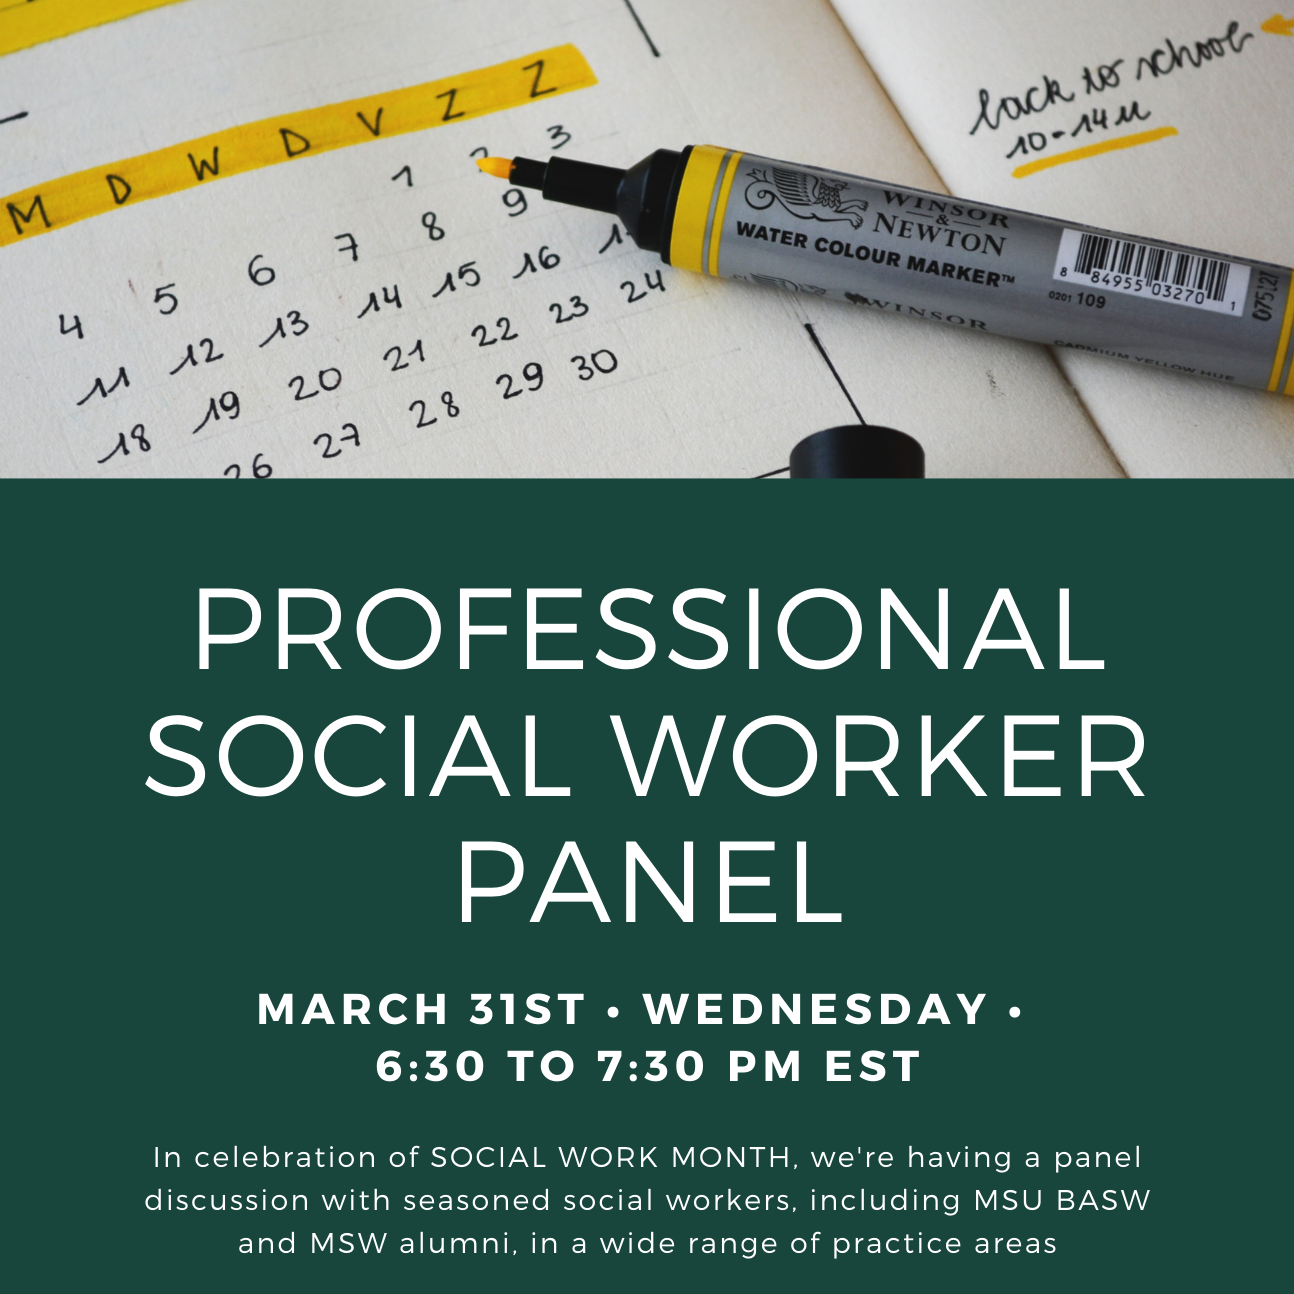 Professional Social Worker Panel